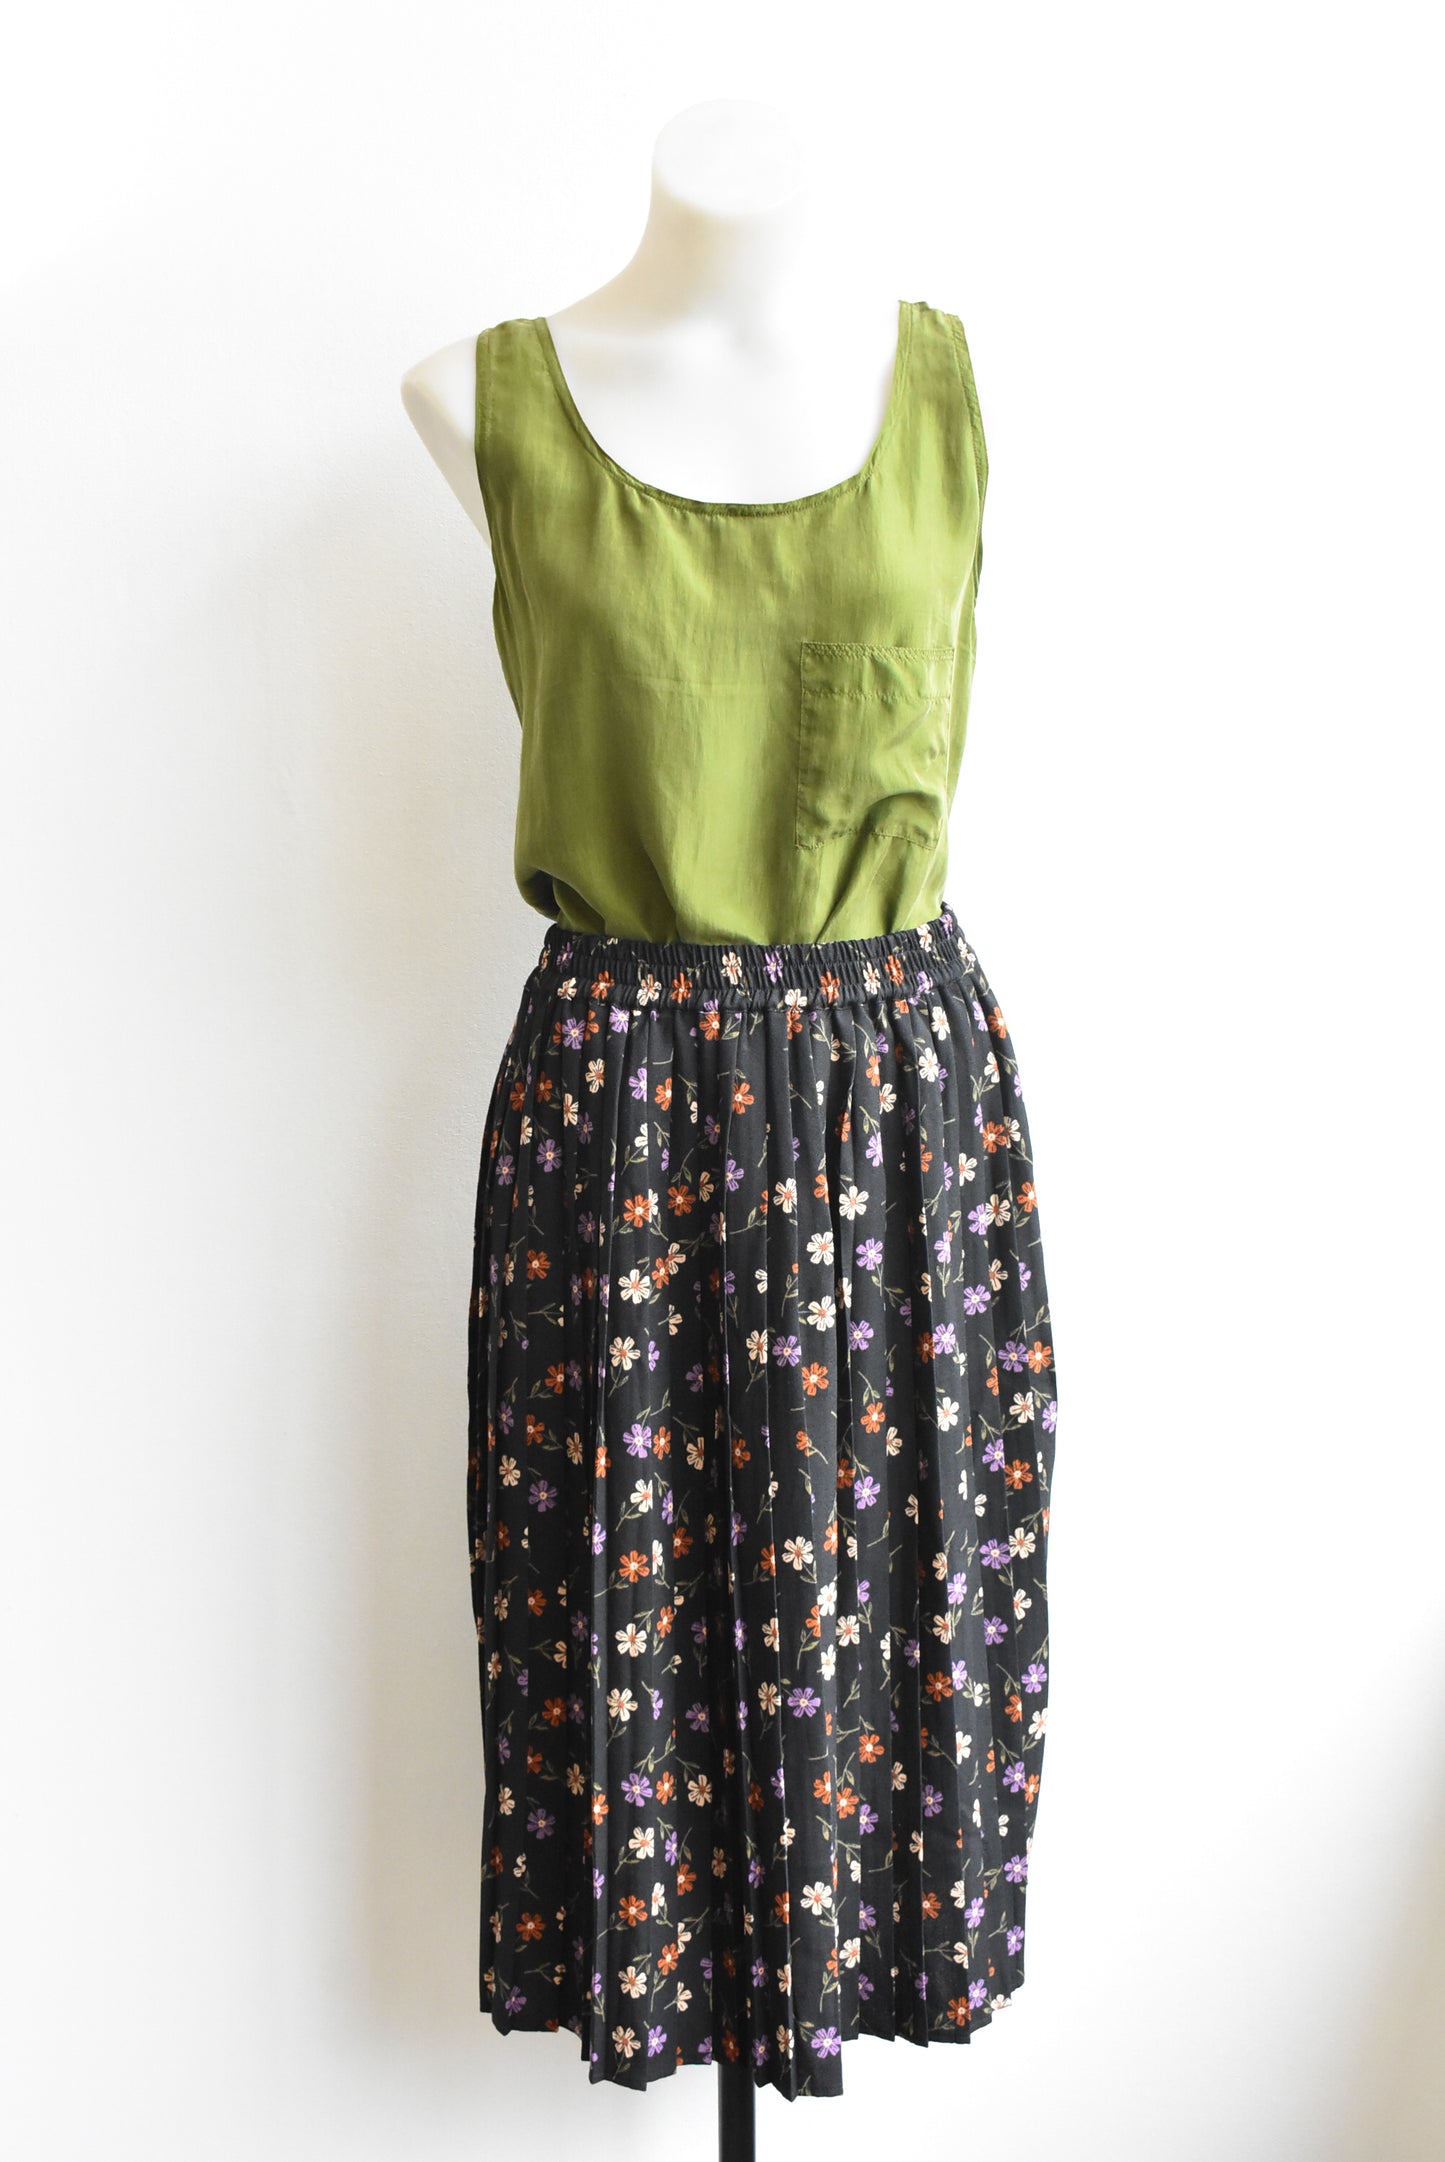 Princess Highway floral pleated skirt, size S